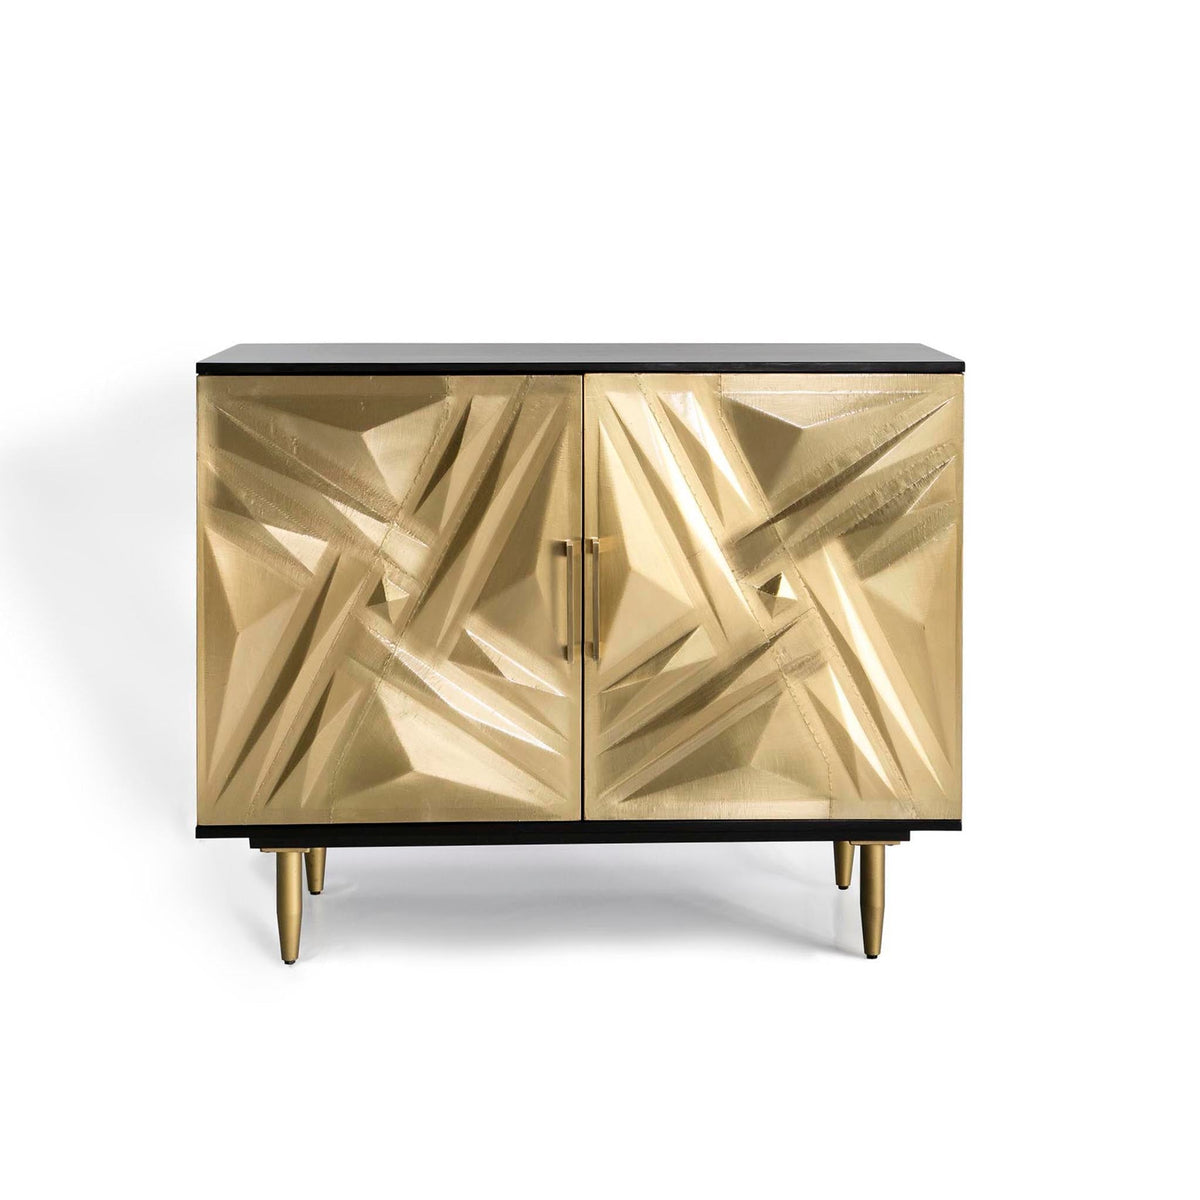 Kandla Gold Metal Cladded Sideboard with Iron Base by Roseland Furniture